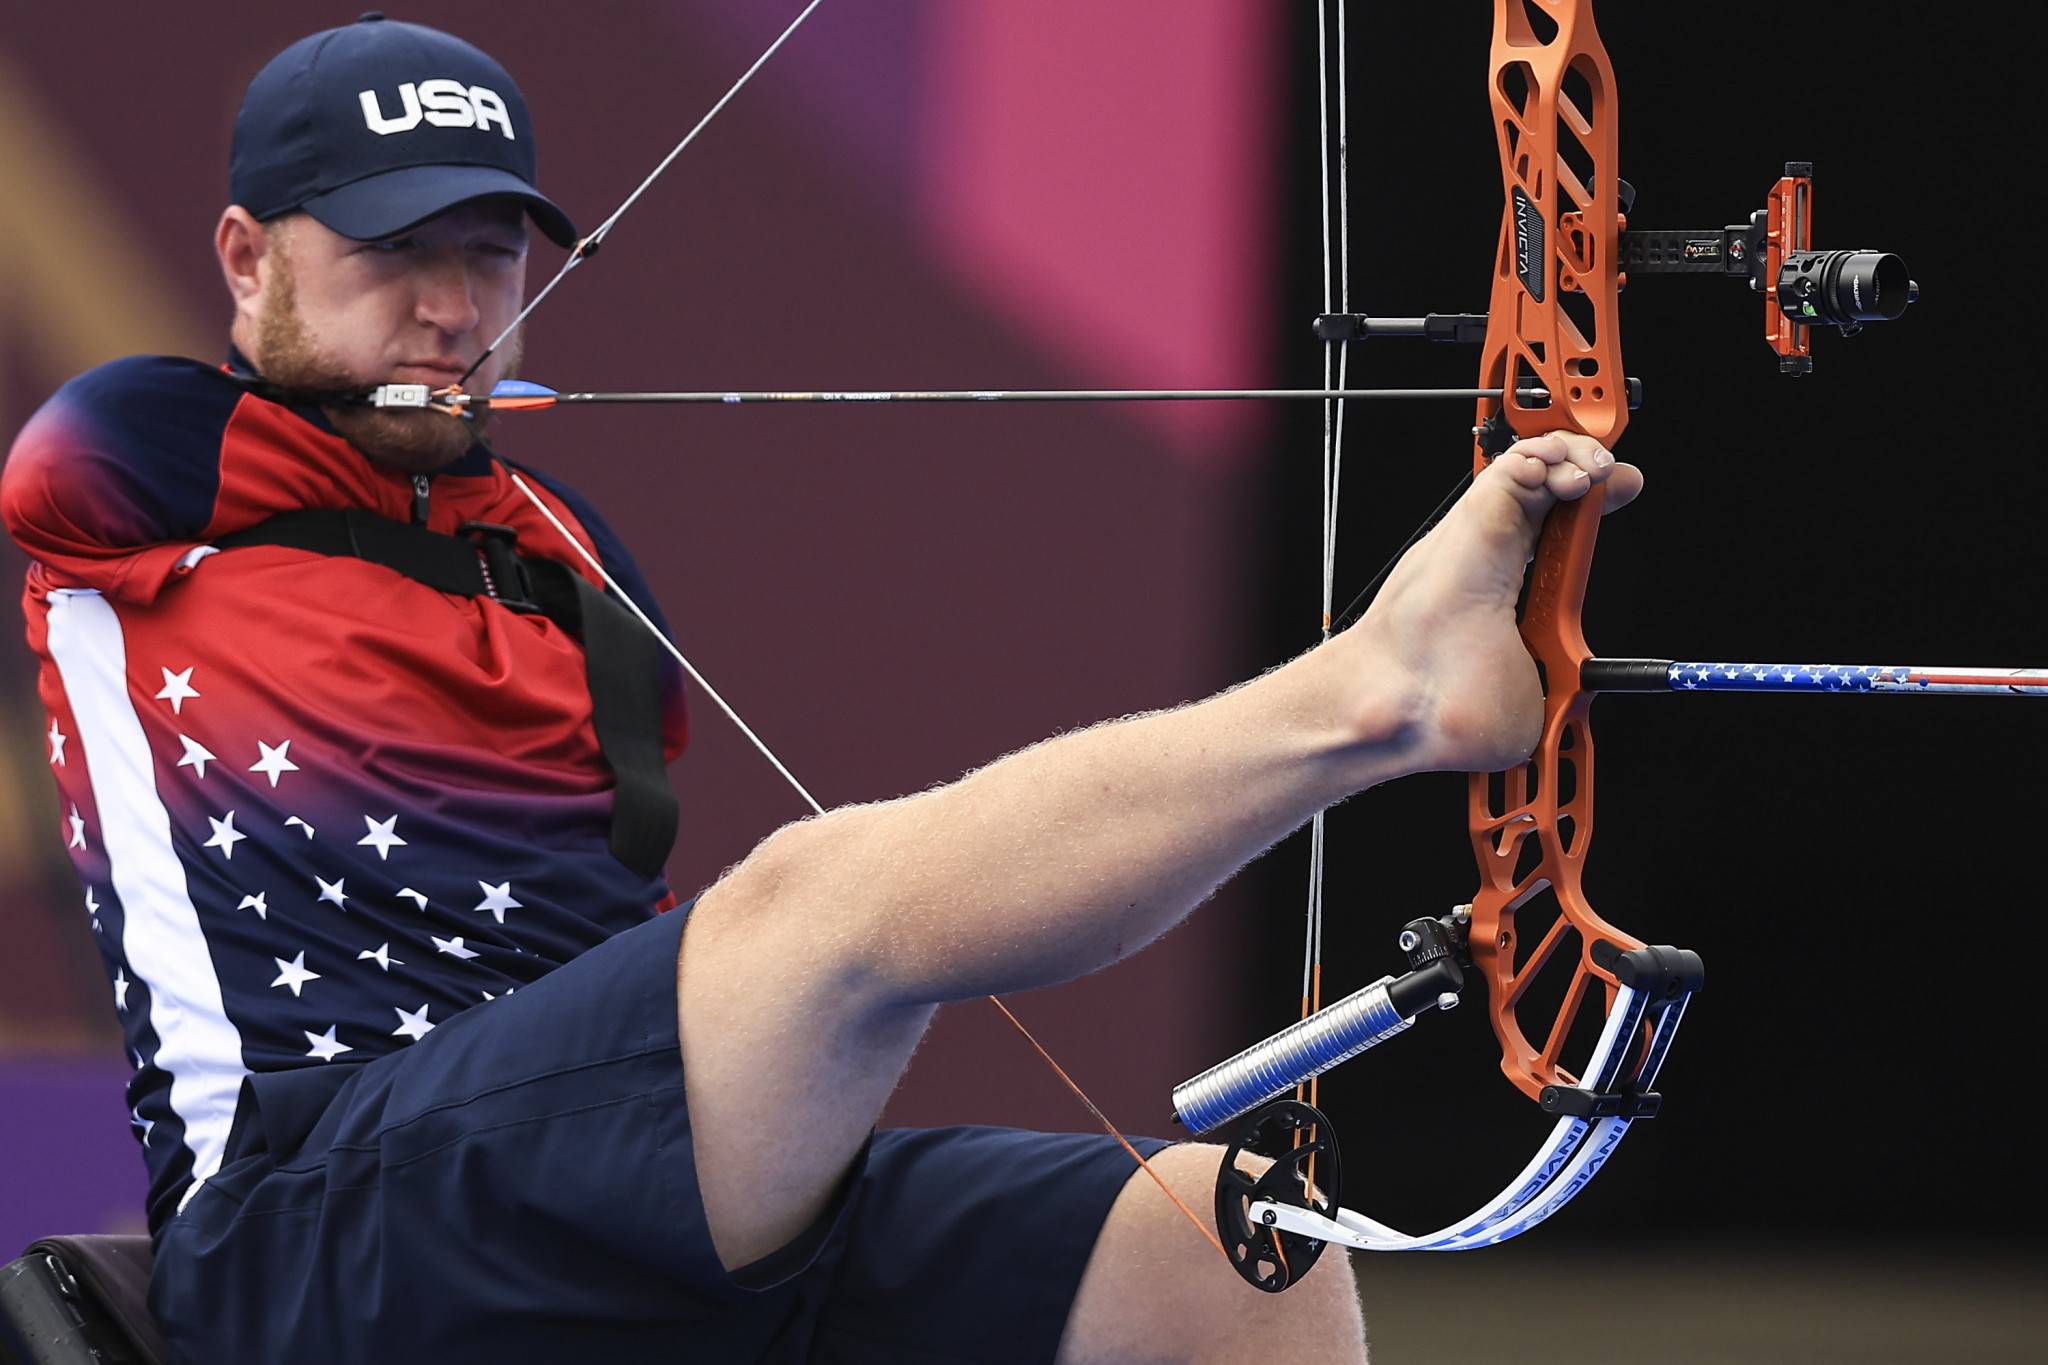 Matt Stutzman is in the final of the World Para Archery Championships ©Getty Images